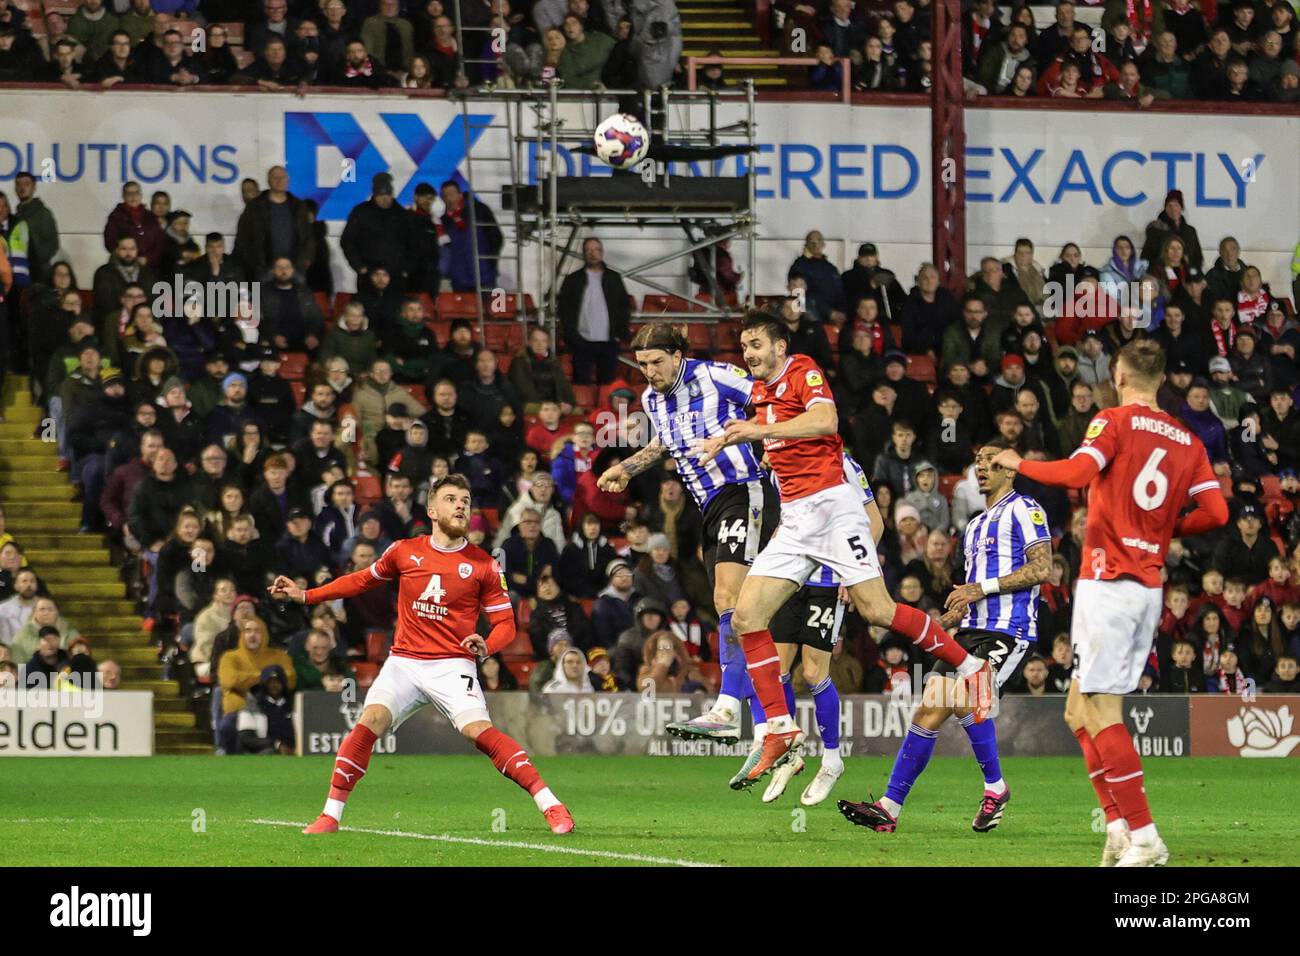 Aden Flint #44 of Sheffield Wednesday =heads n goal during the Sky Bet League 1 match Barnsley vs Sheffield Wednesday at Oakwell, Barnsley, United Kingdom, 21st March 2023  (Photo by Mark Cosgrove/News Images) Stock Photo